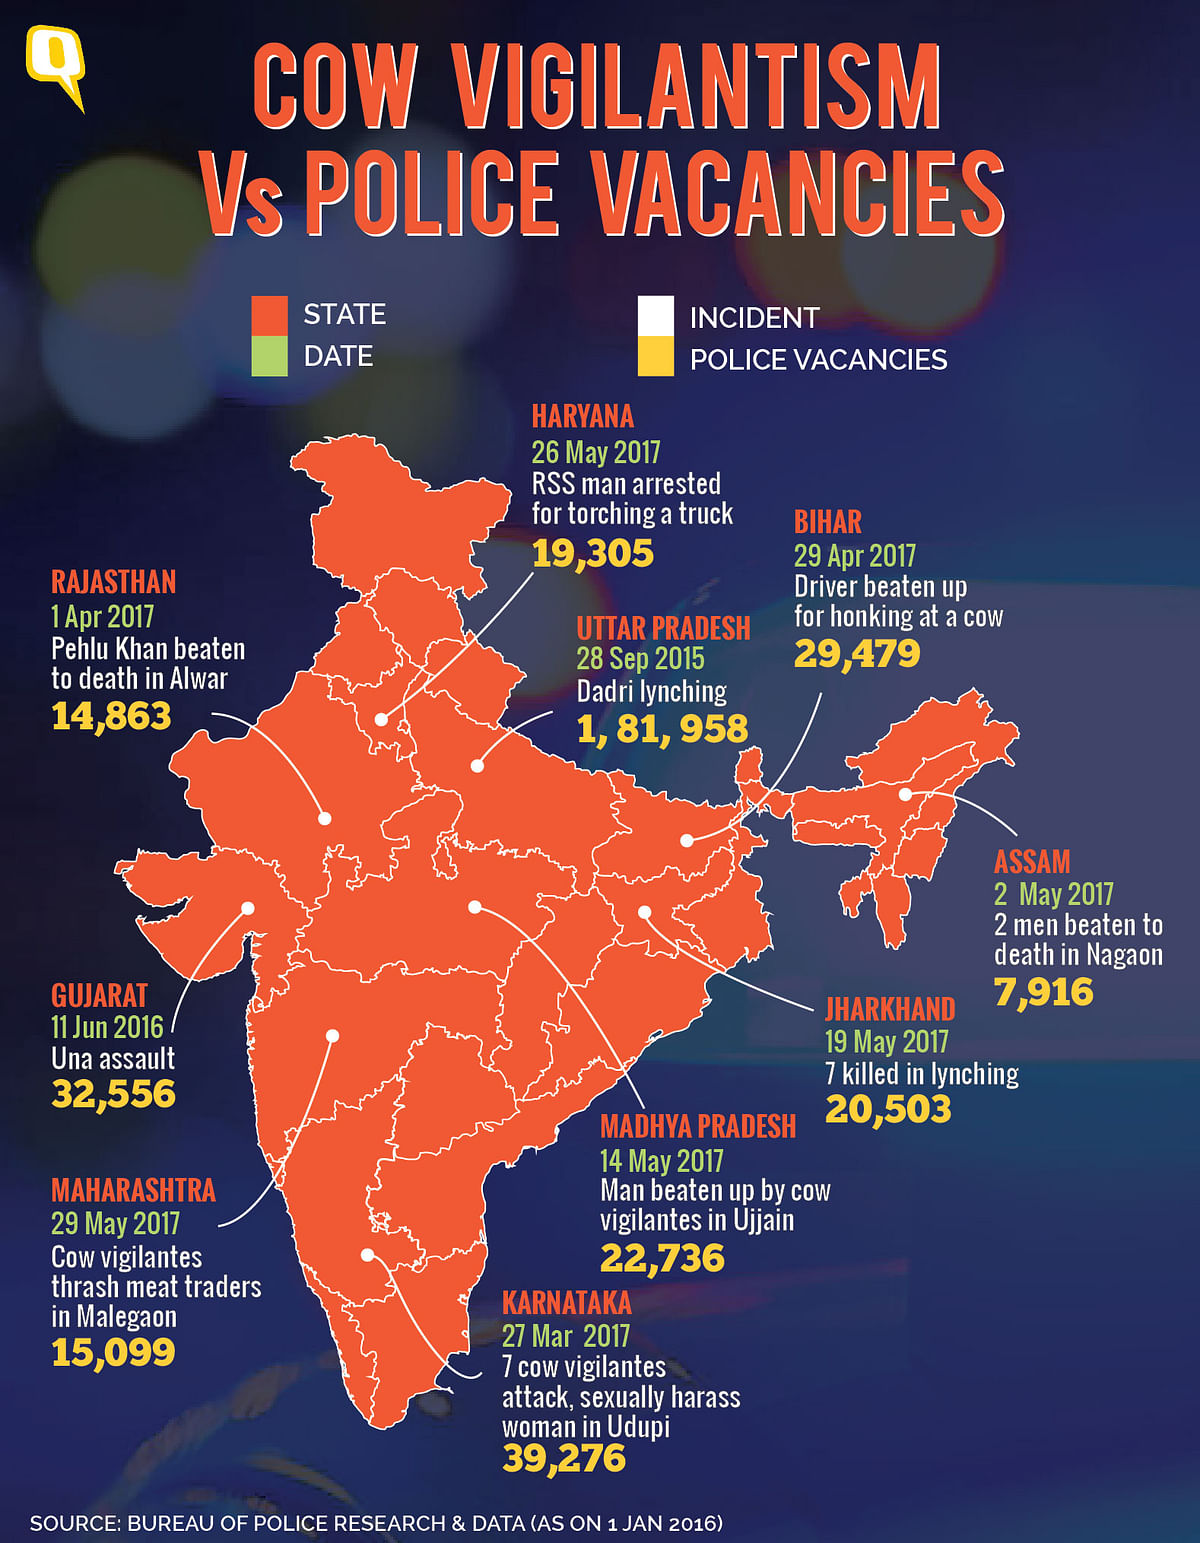 Shortage of police at various ranks across states could be the reason behind rise in incidents of cow vigilantism.